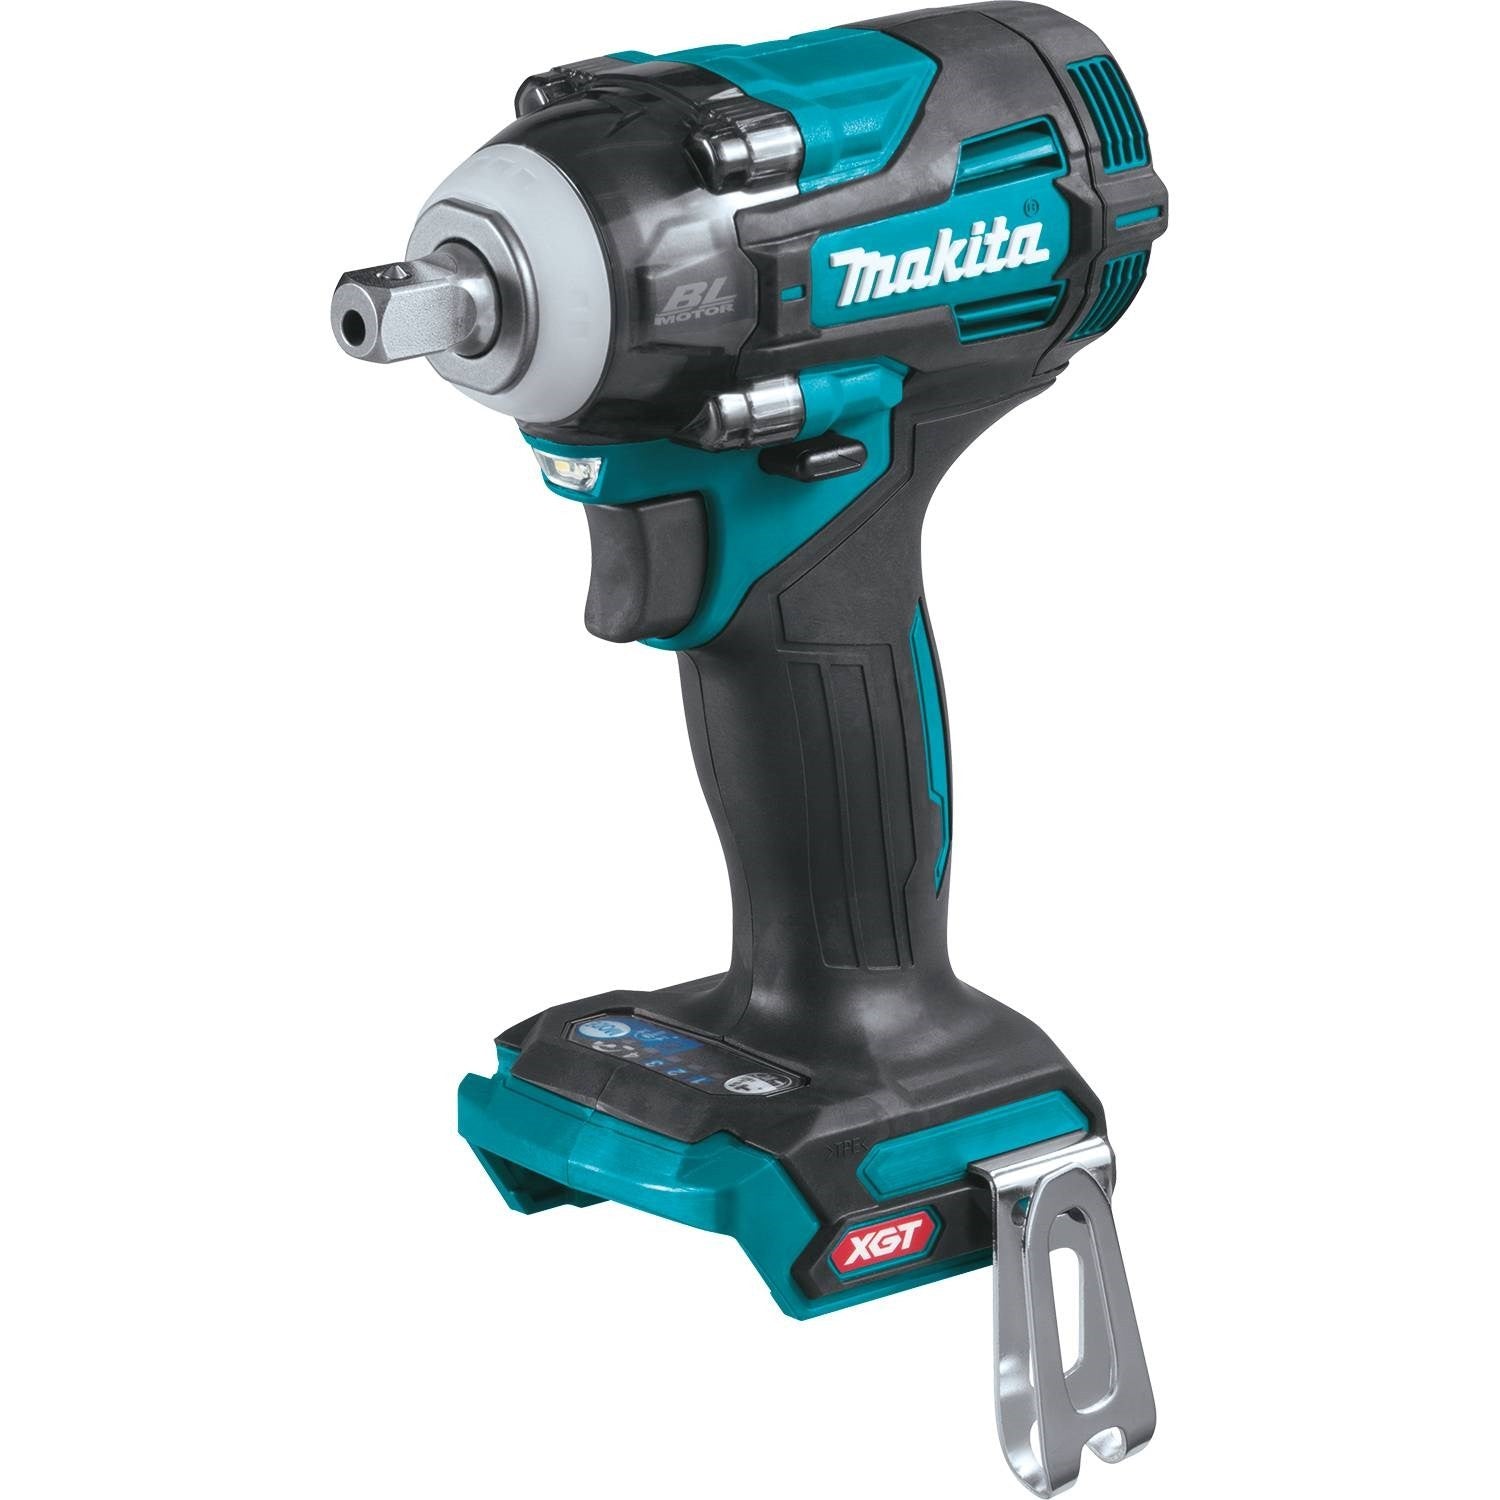 Makita GWT05Z 40V MAX XGT® Impact Wrench w/ Detent Anvil, Tool Only